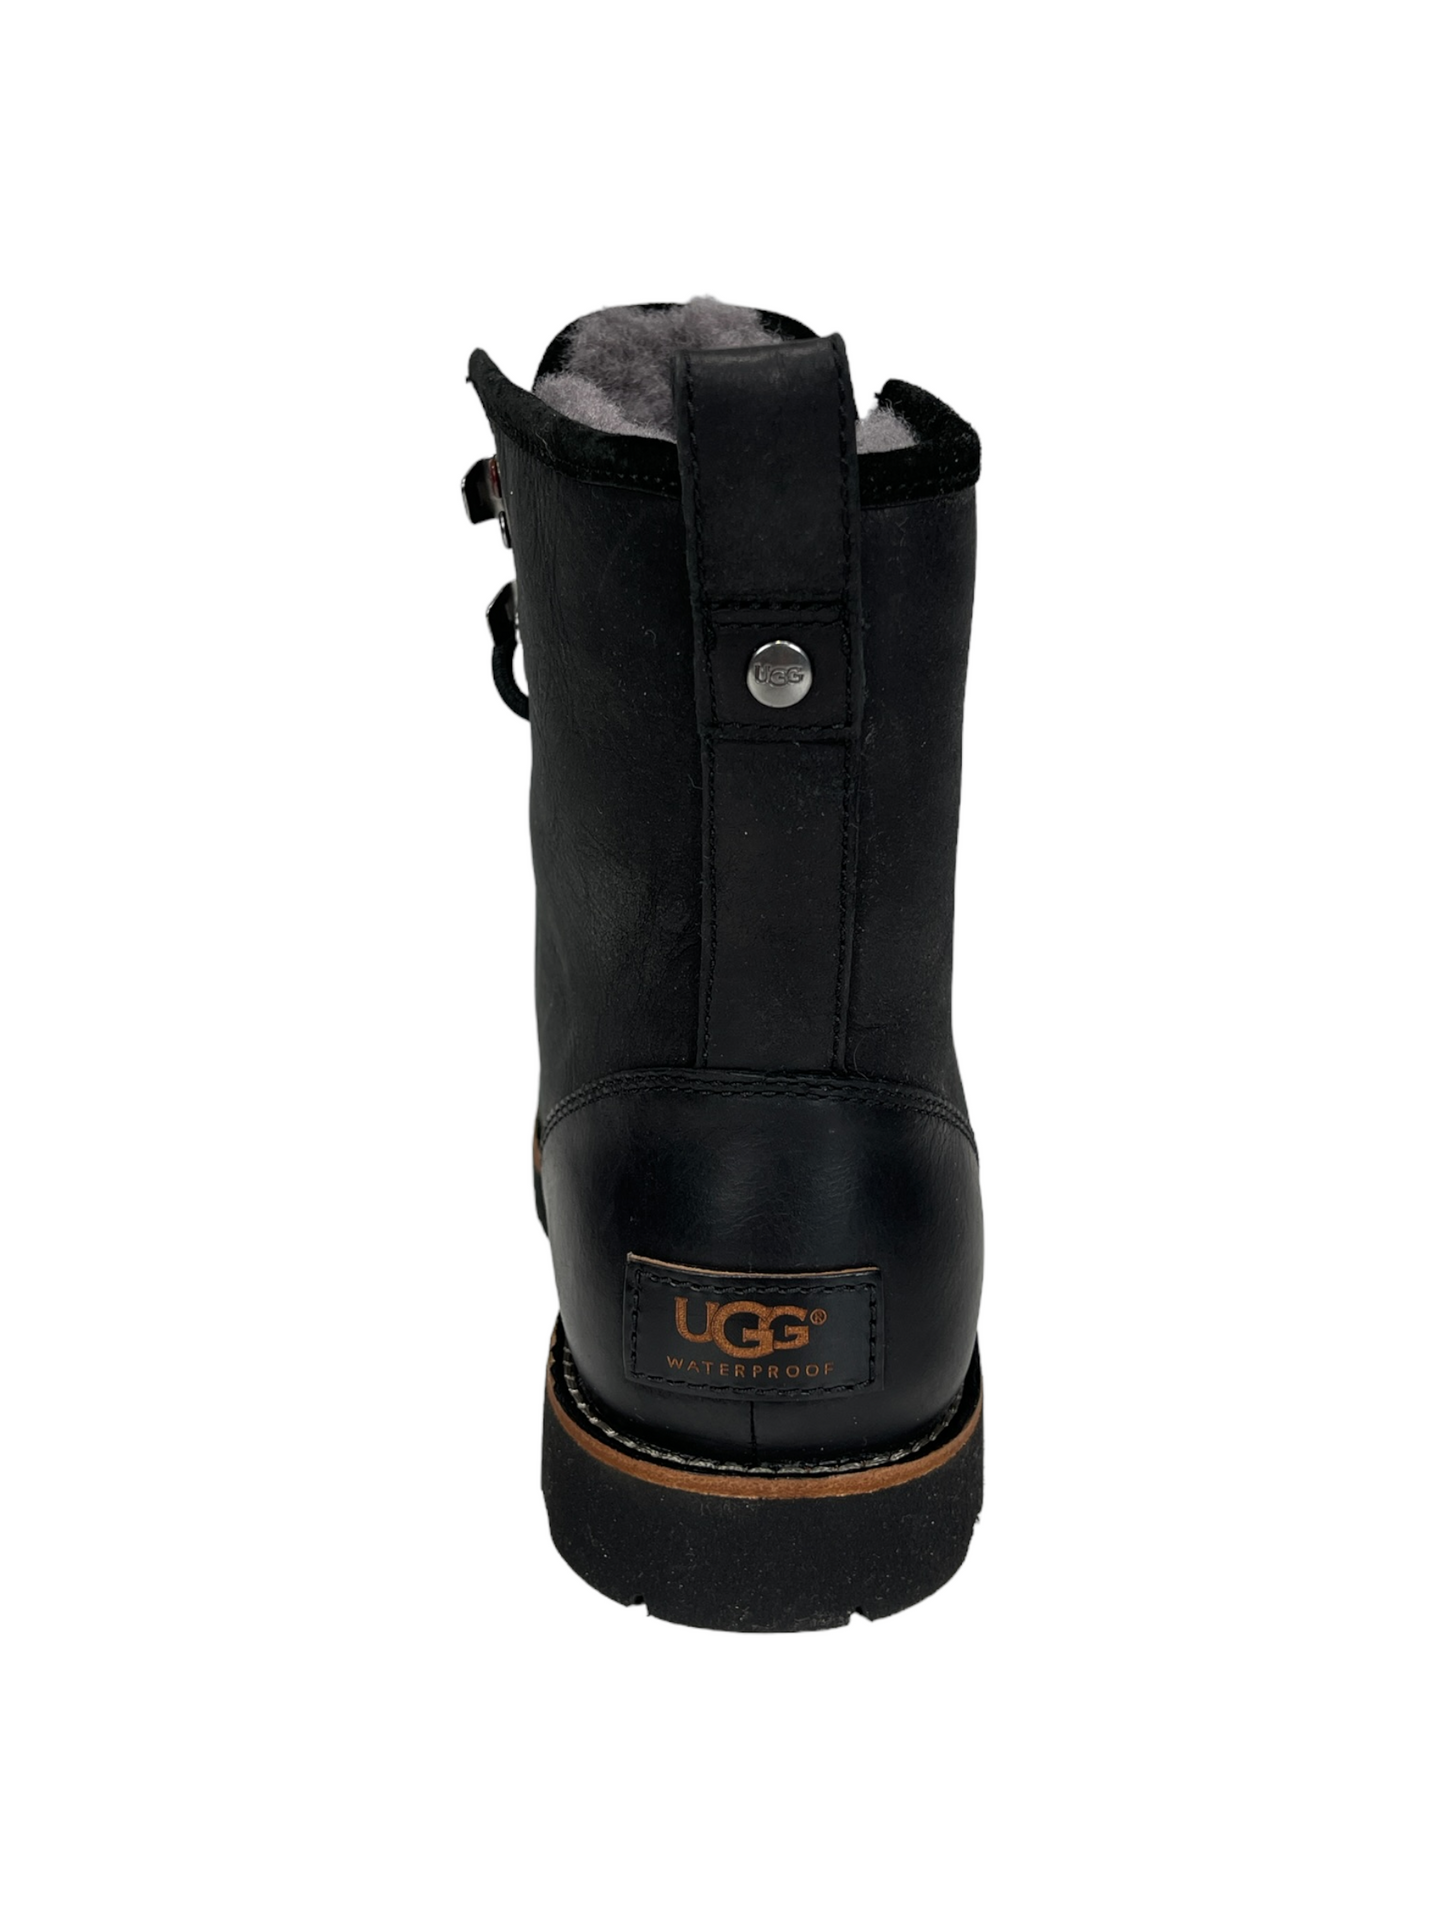 UGG Black Leather Winter Boot 8 US- Genuine Design Luxury Consignment Calgary, Alberta, Canada New and Pre-Owned Clothing, Shoes, Accessories.\